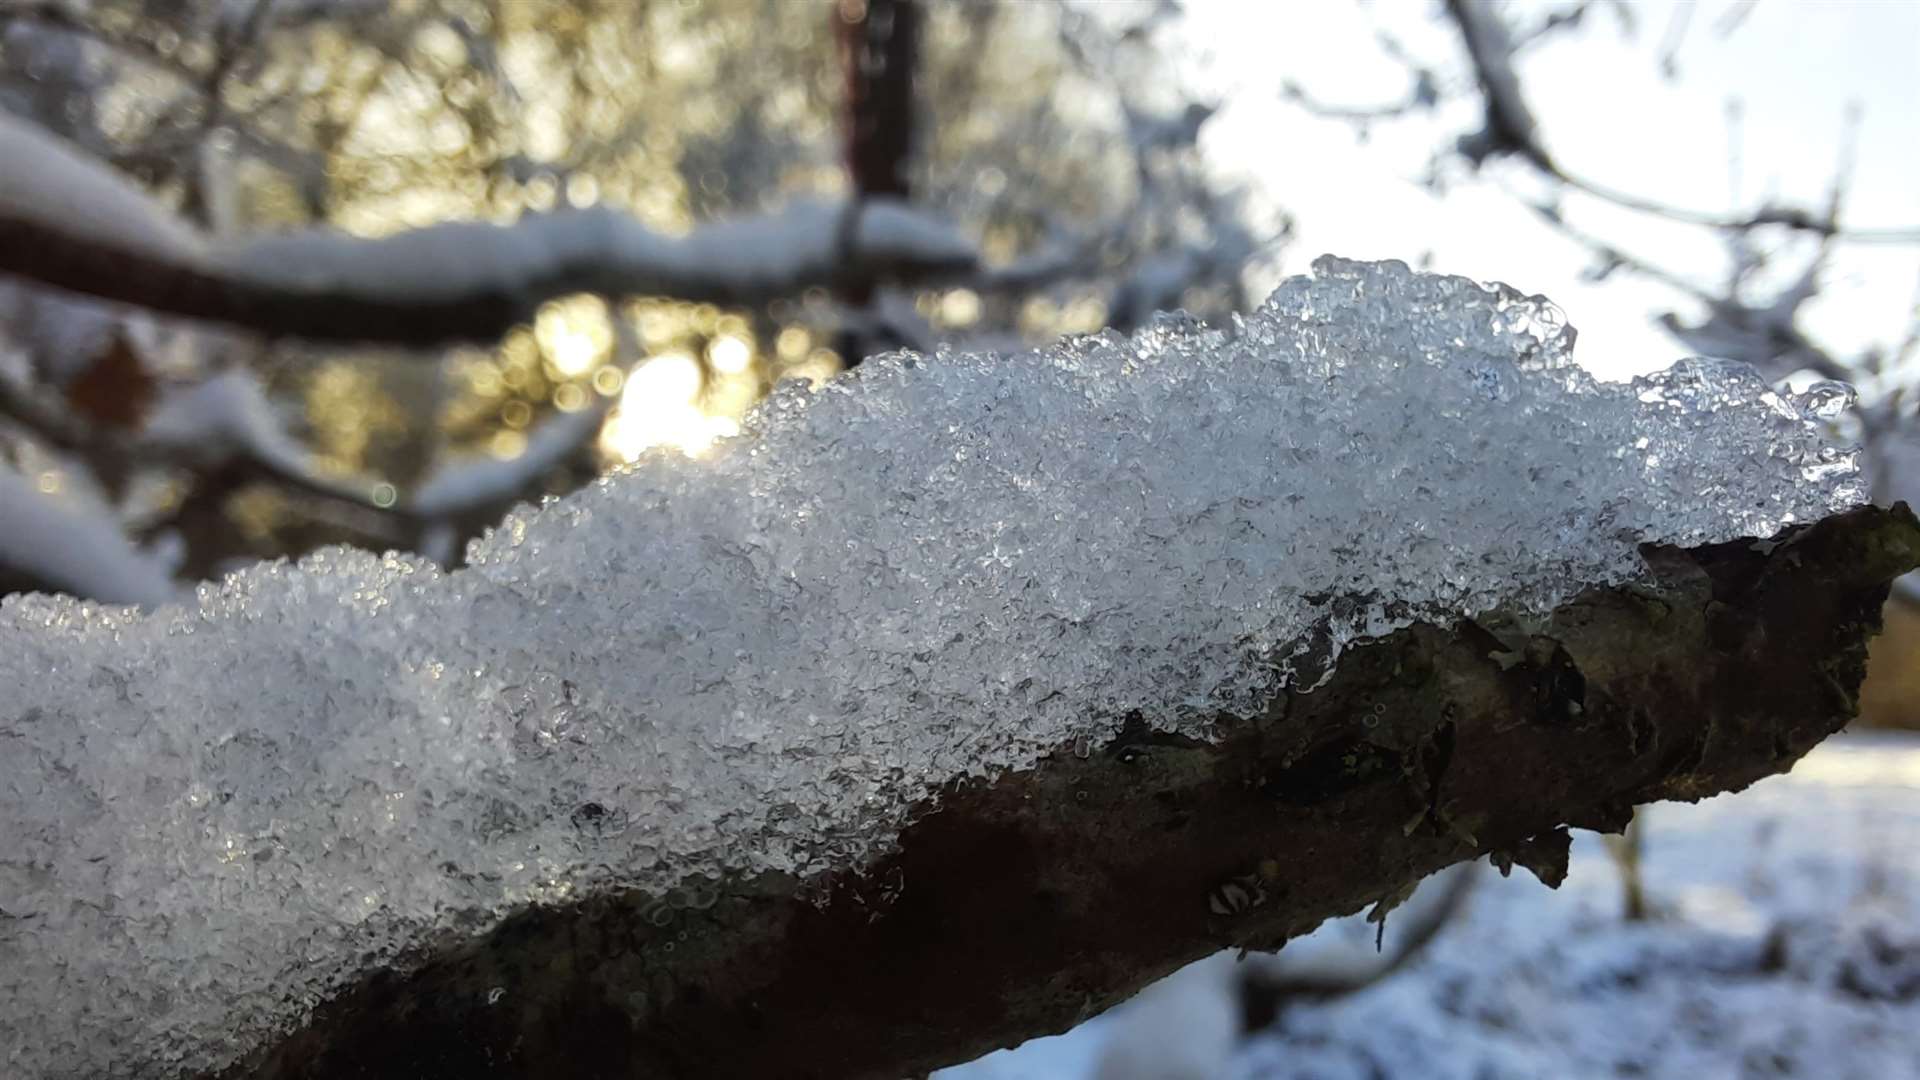 Taking a closer look at the snow and ice in the winter light.